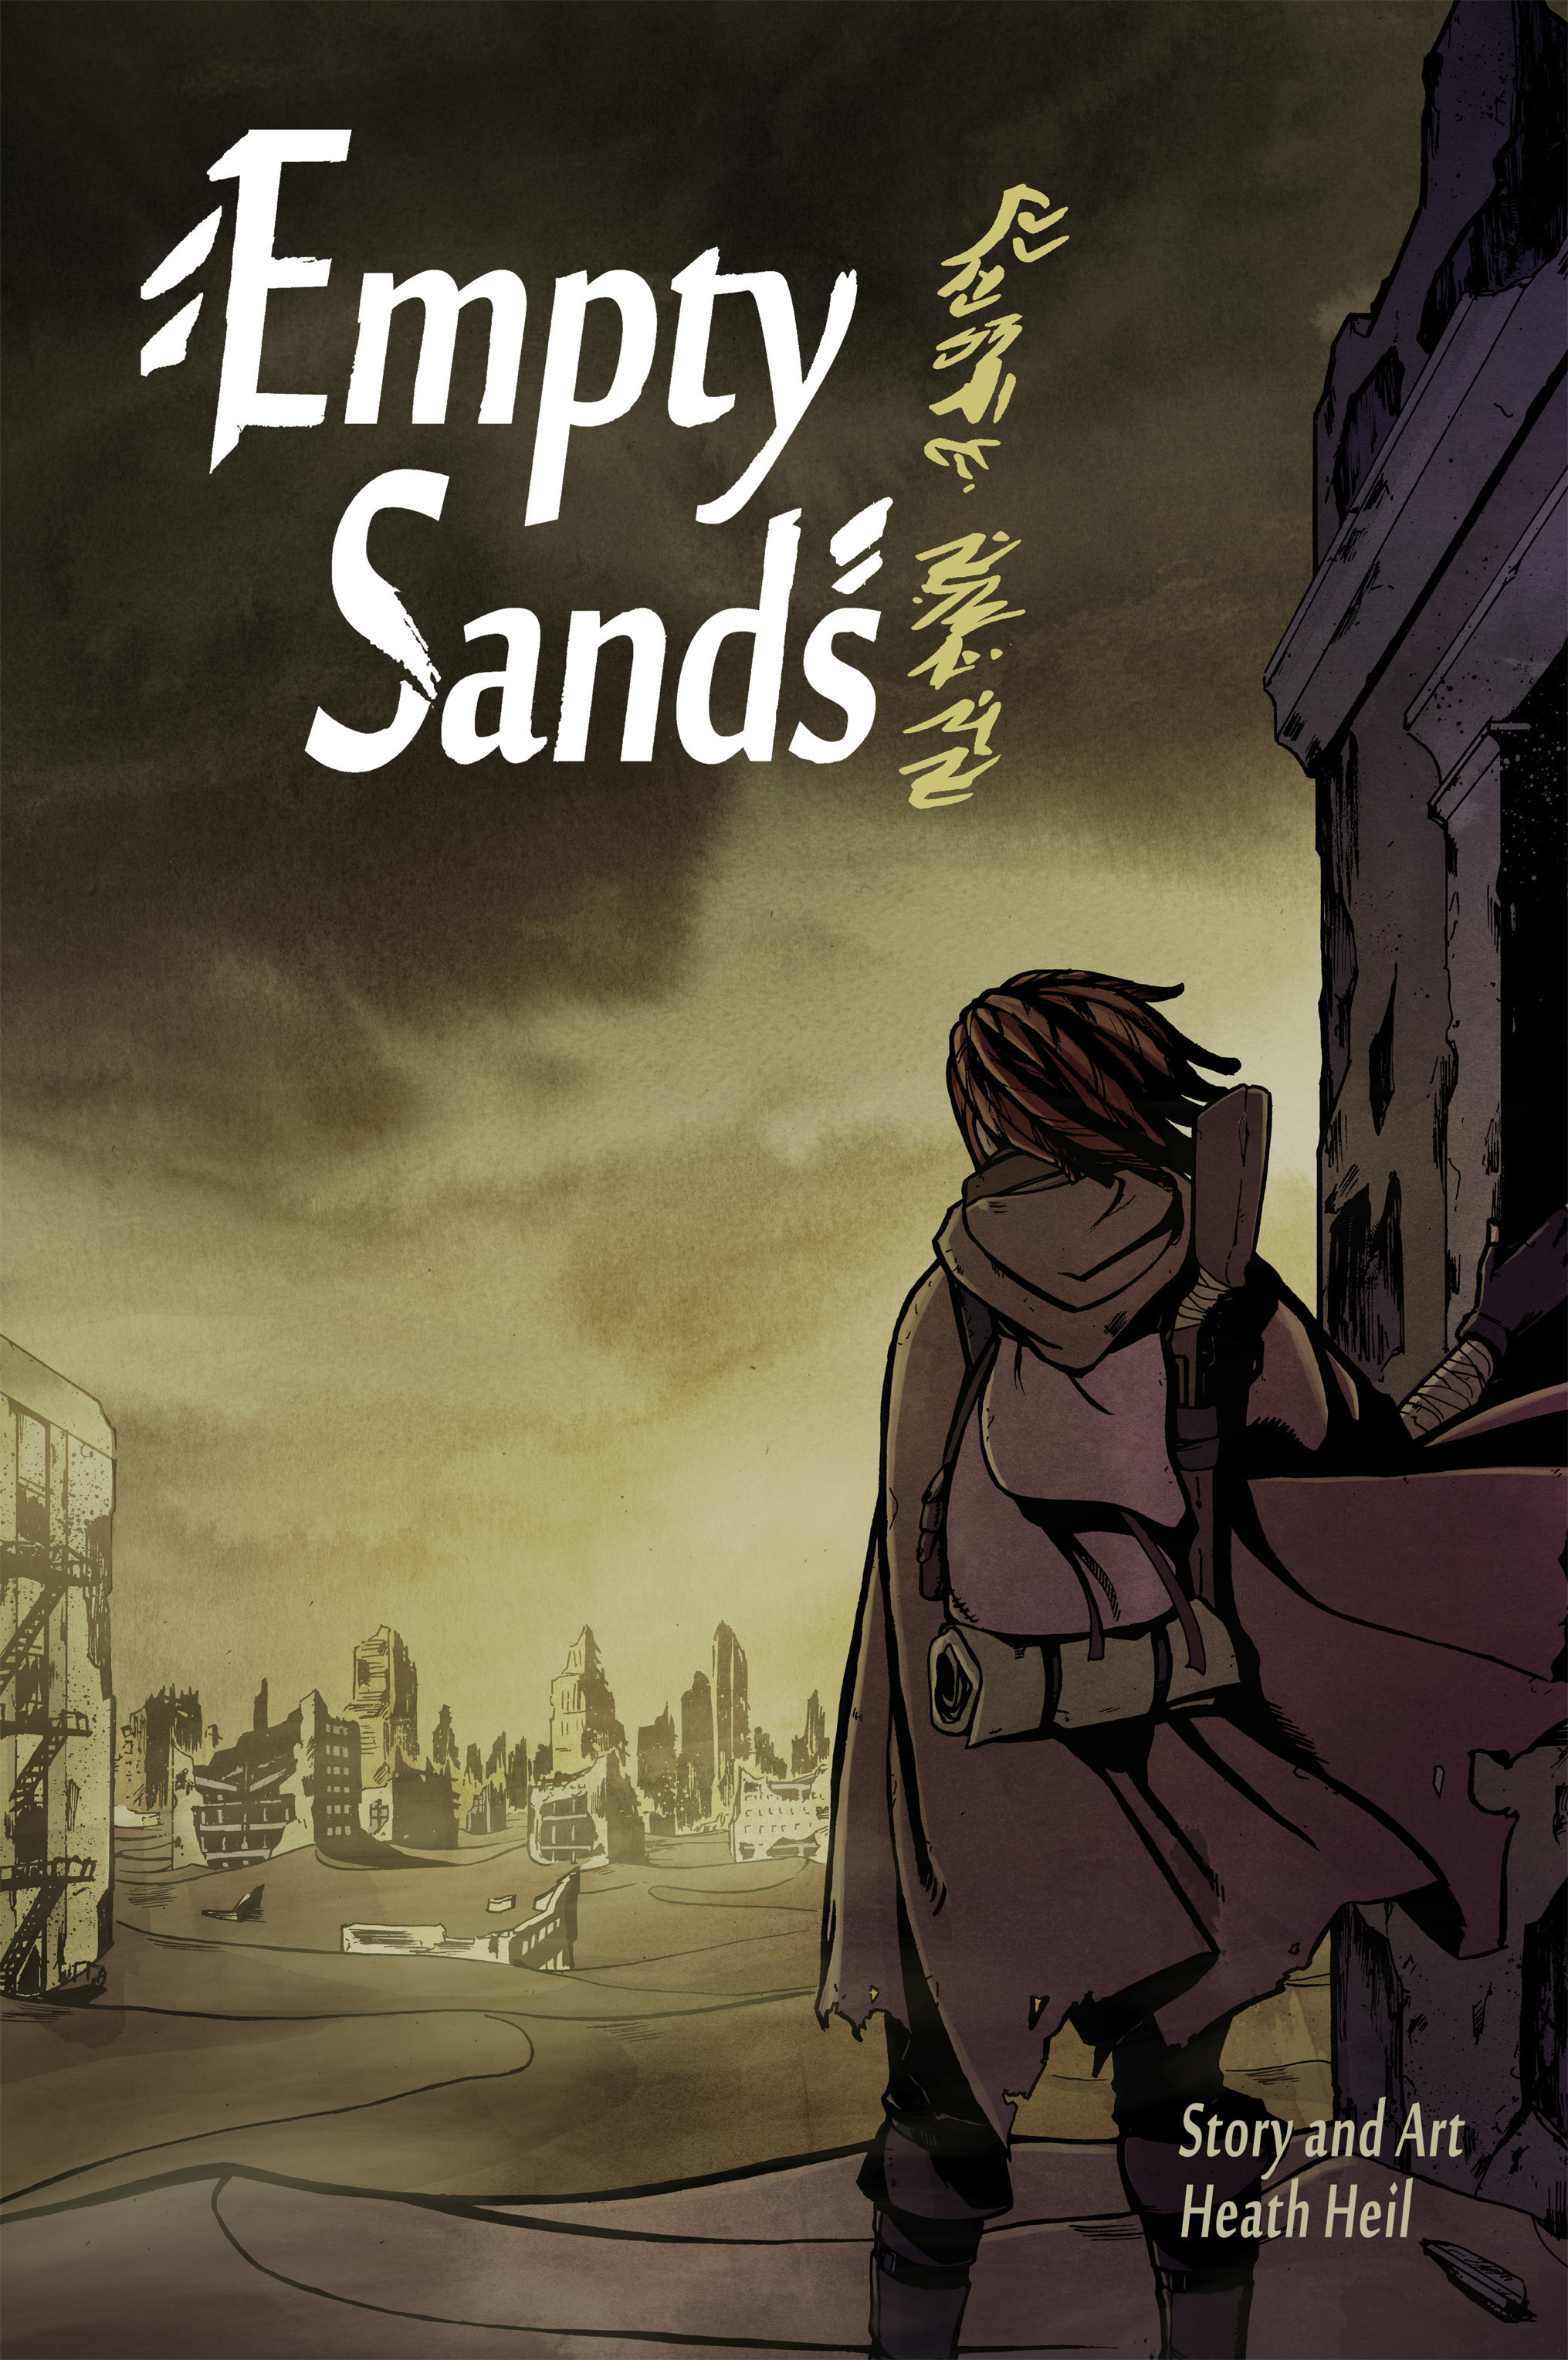 Read online Empty Sands comic -  Issue # Full - 1